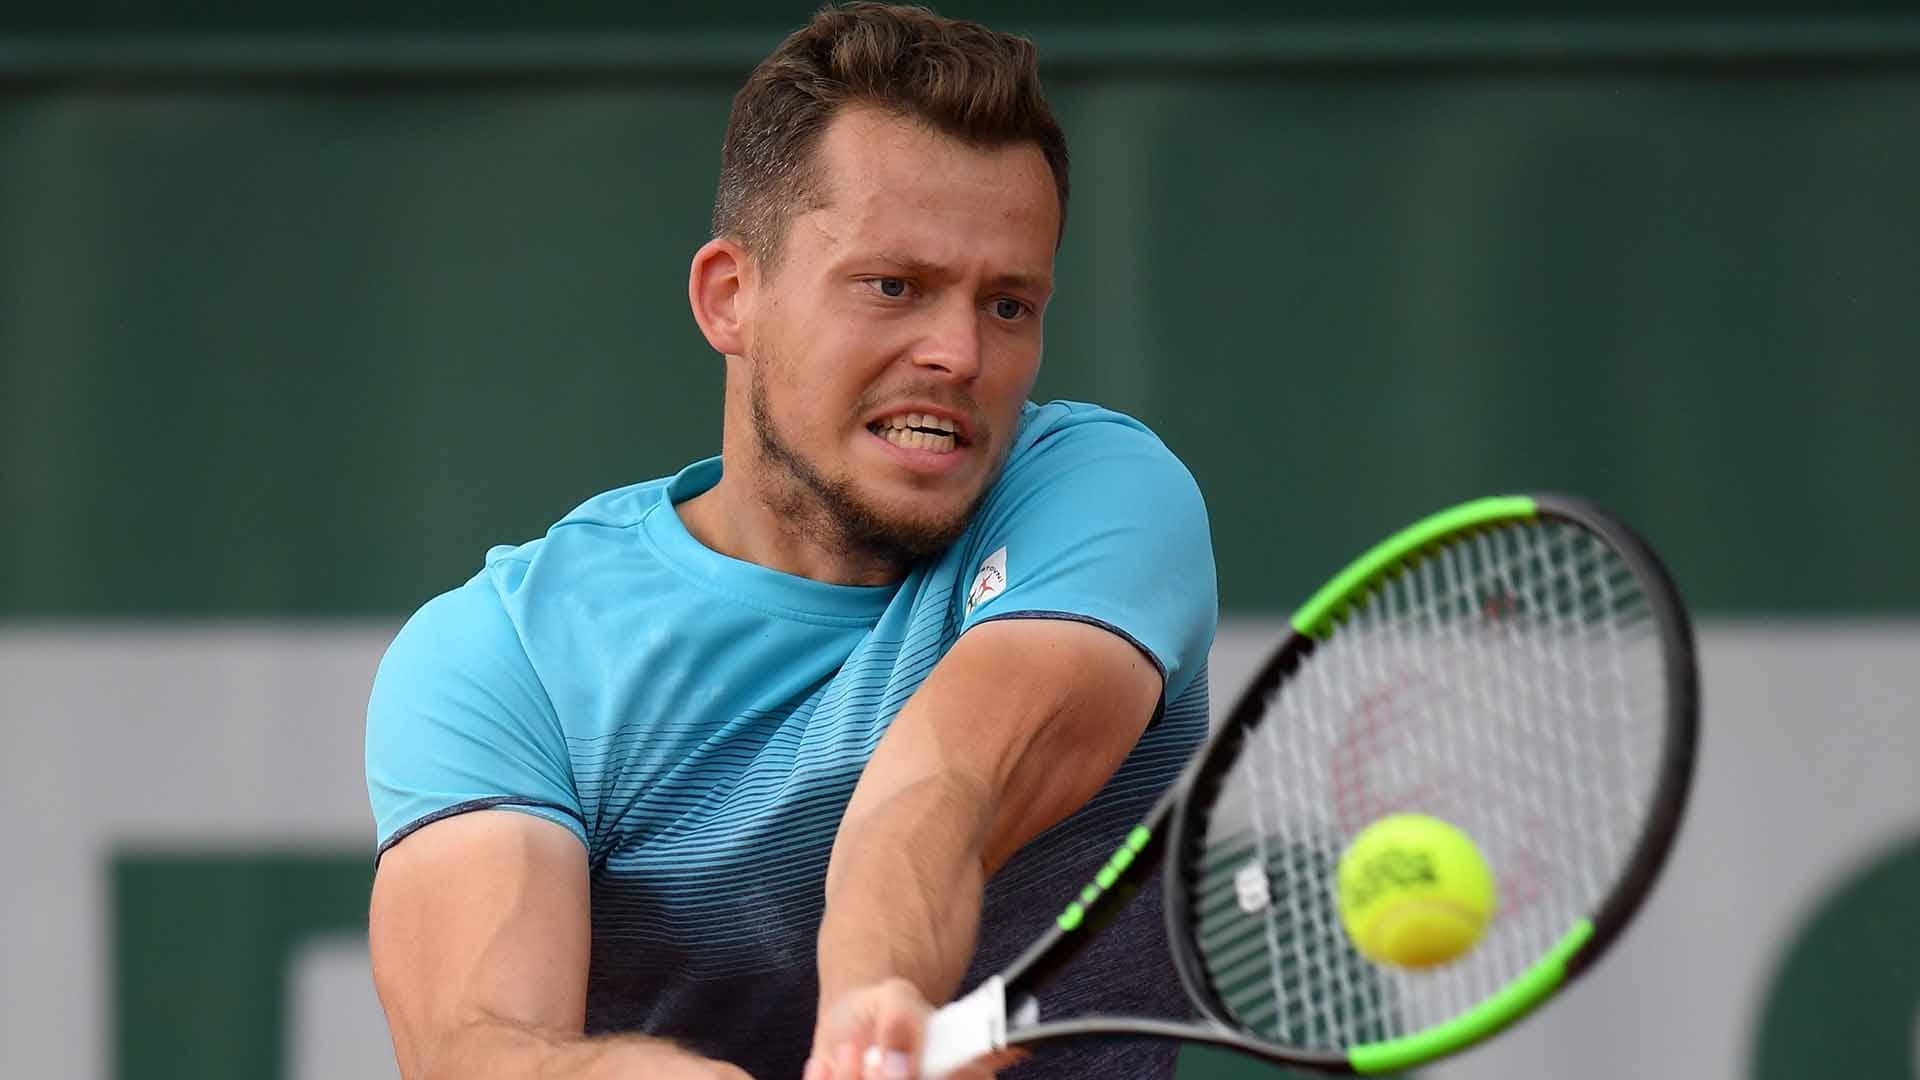 Adam Pavlasek breaks Ryan Harrison on four occasions to reach the second qualifying round at Roland Garros on Tuesday.